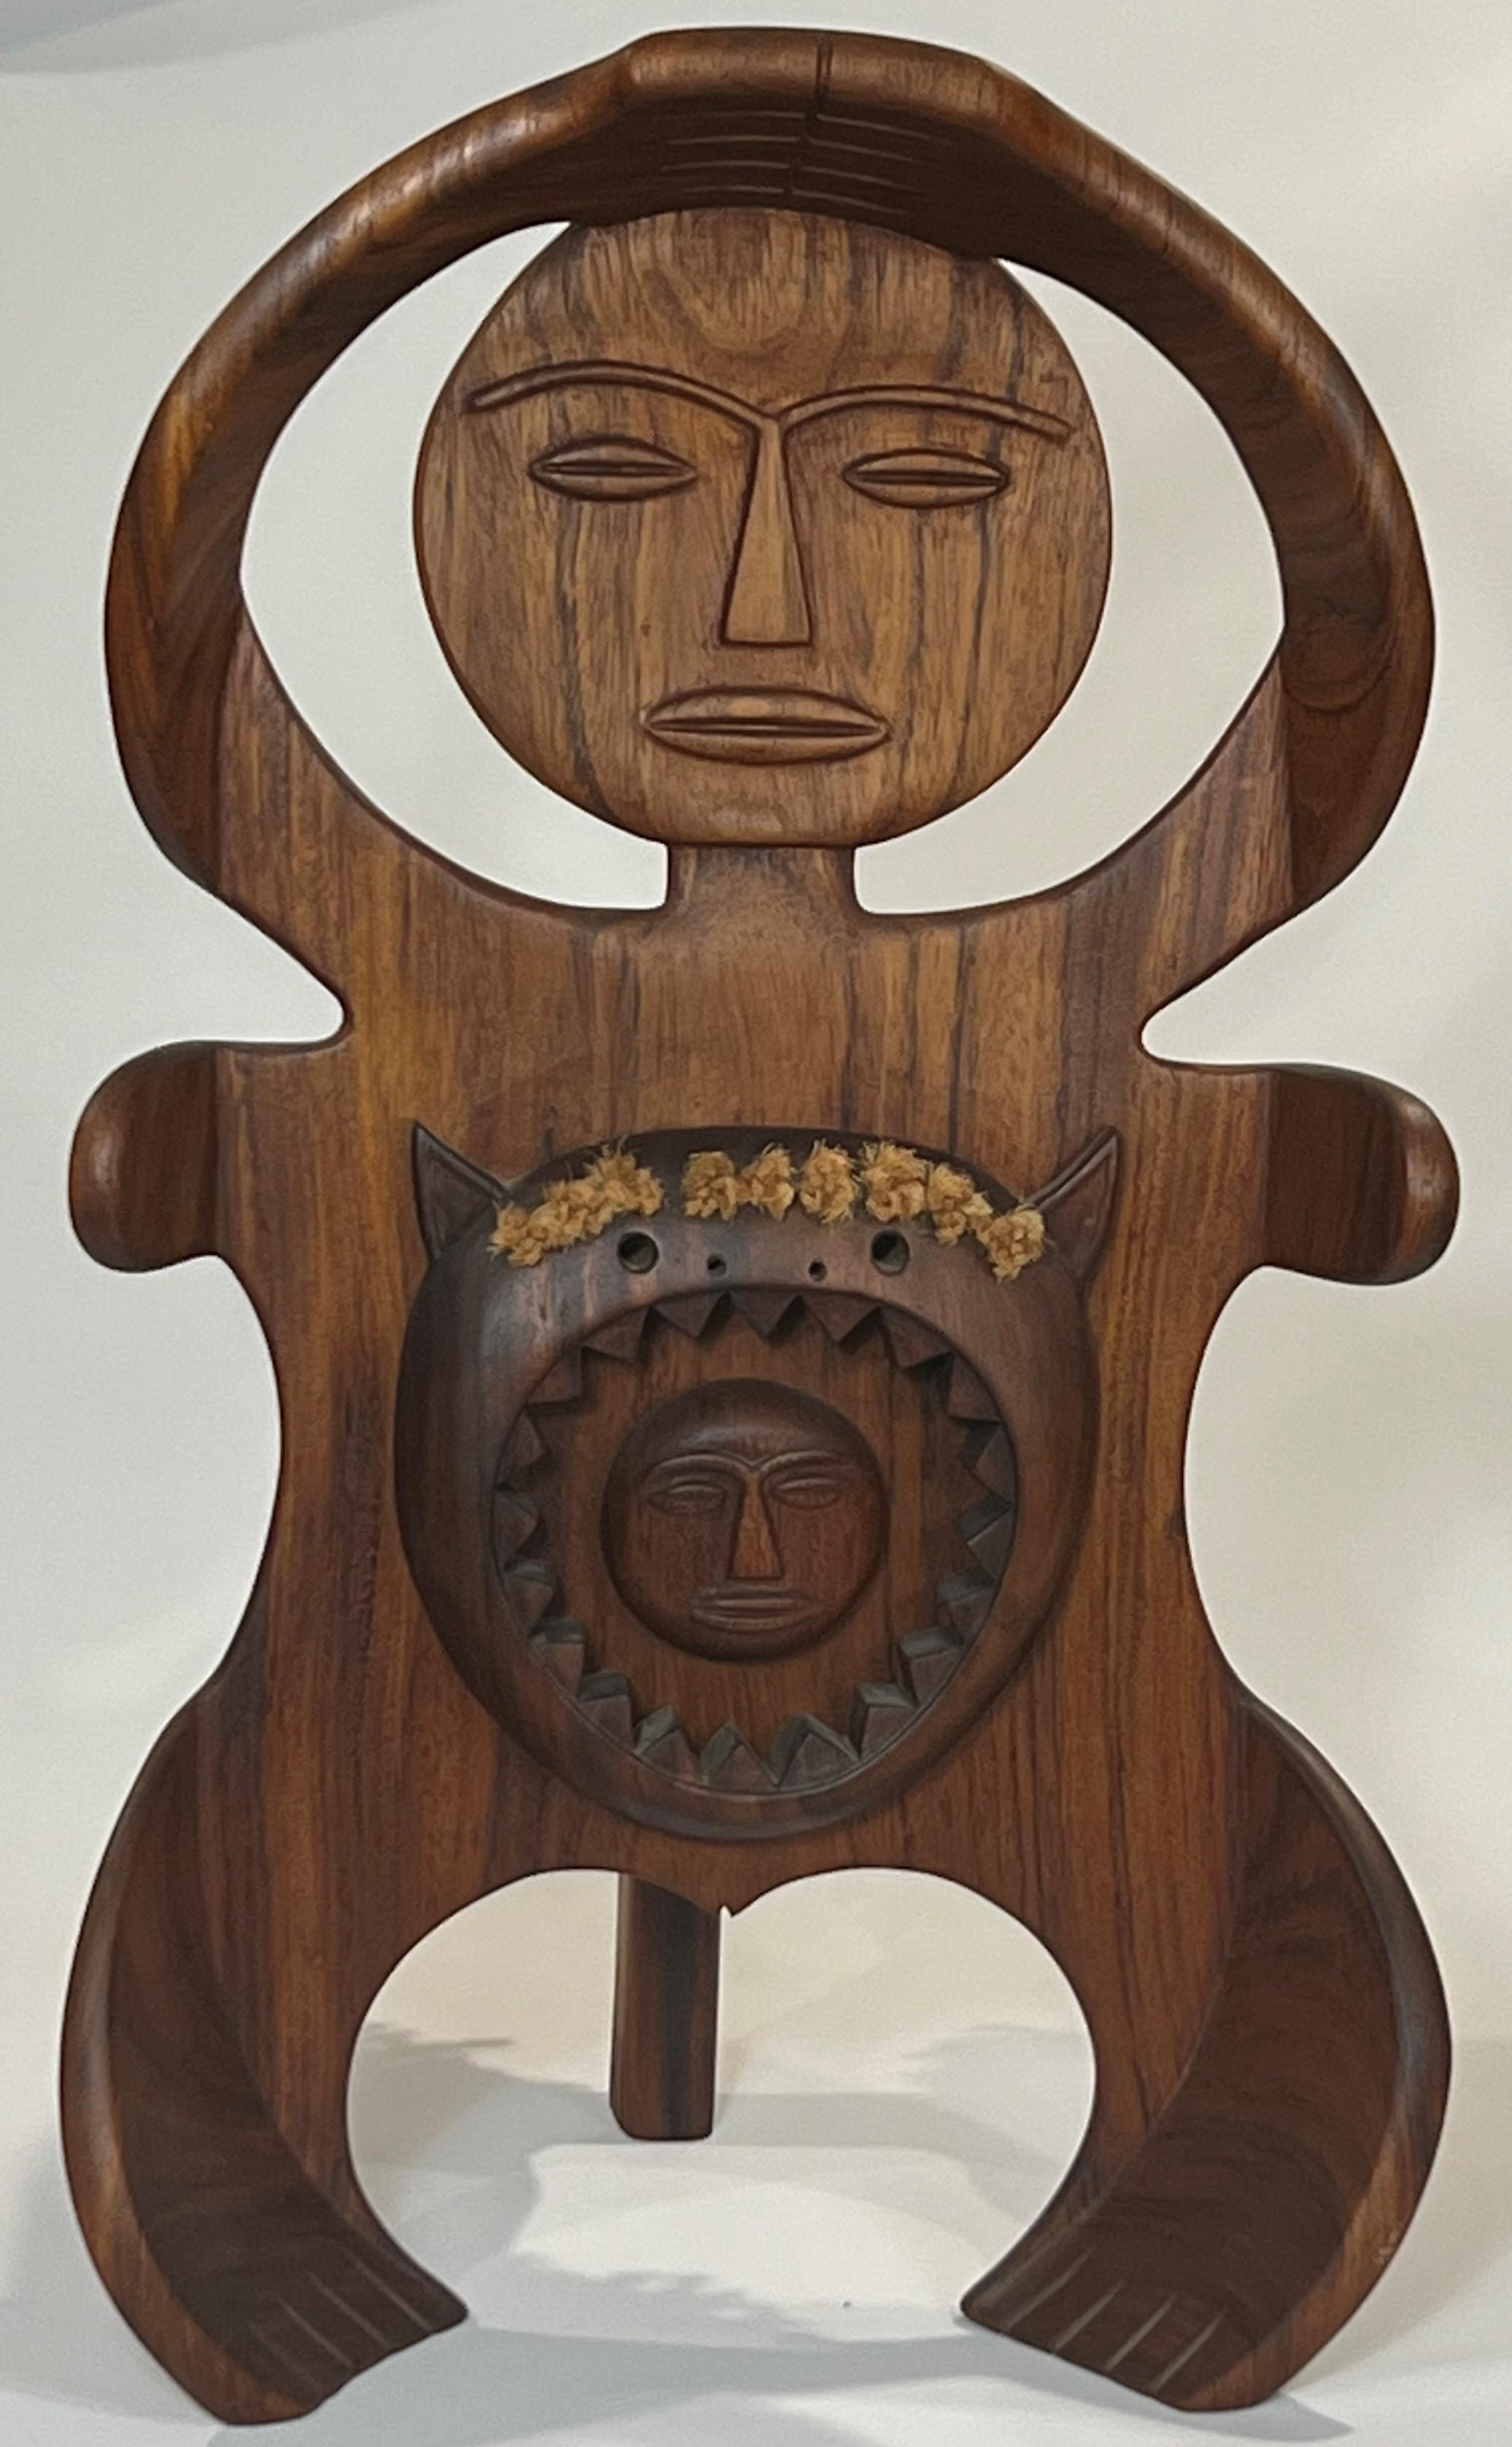 An early and fully three dimensional sculpture by Edwin Scheier exhibiting a symbolic or mythological representation that represents the circle of life. The bent wood, carving, piercing and rope work are all manifest at a high level in this quixotic